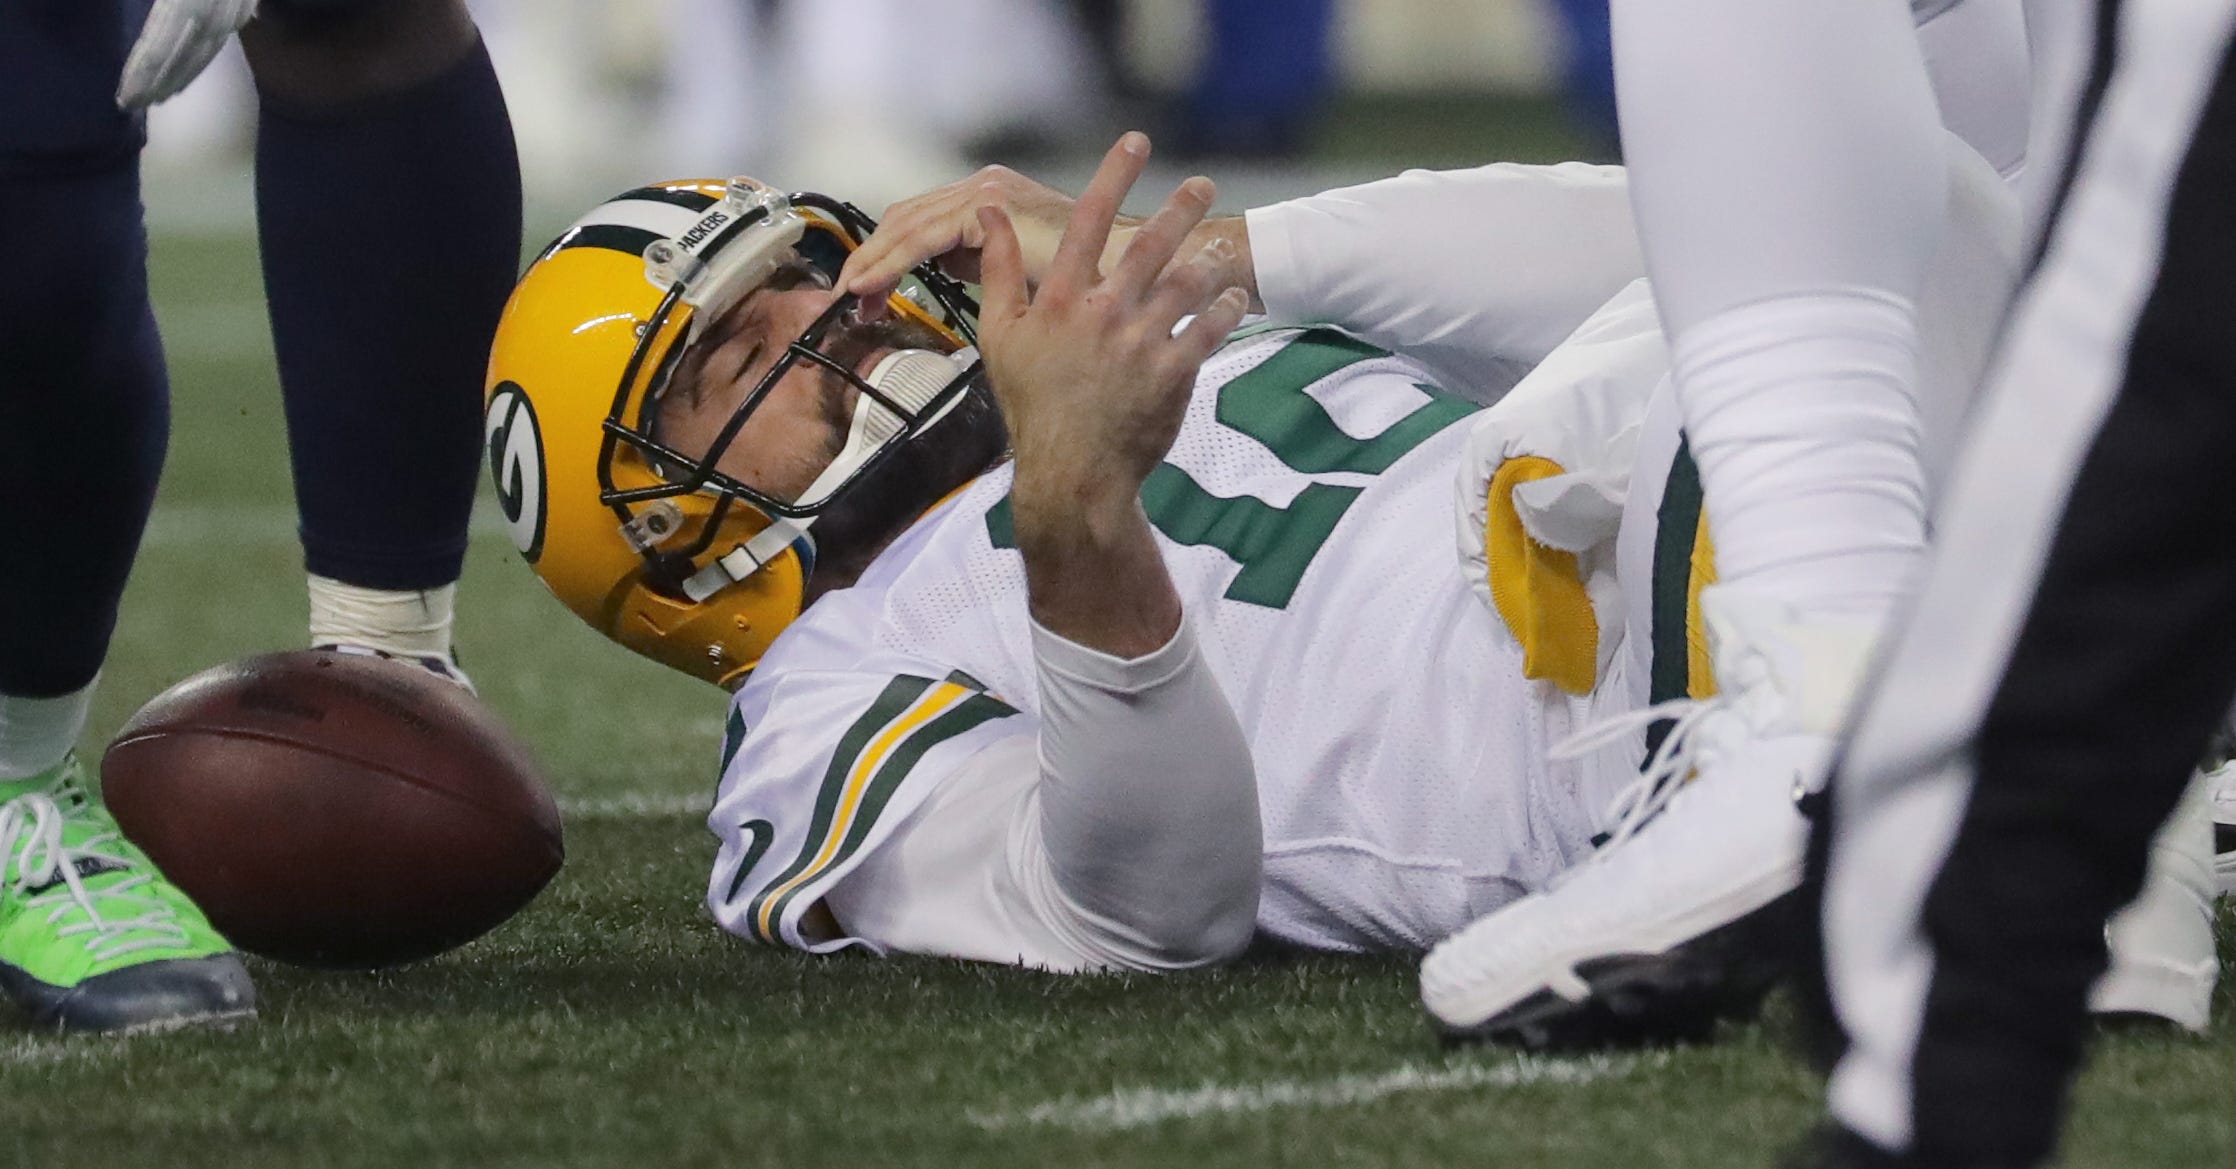 Green Bay Packers quarterback Aaron Rodgers (12) adjust his helmet after being sacked during the second quarter of their game against the Seattle Seahawks Thursday, November 25, 2018 at CenturyLink Field in Seattle, Wash.

MARK HOFFMAN/MHOFFMAN@JOURNALSENTINEL.COM